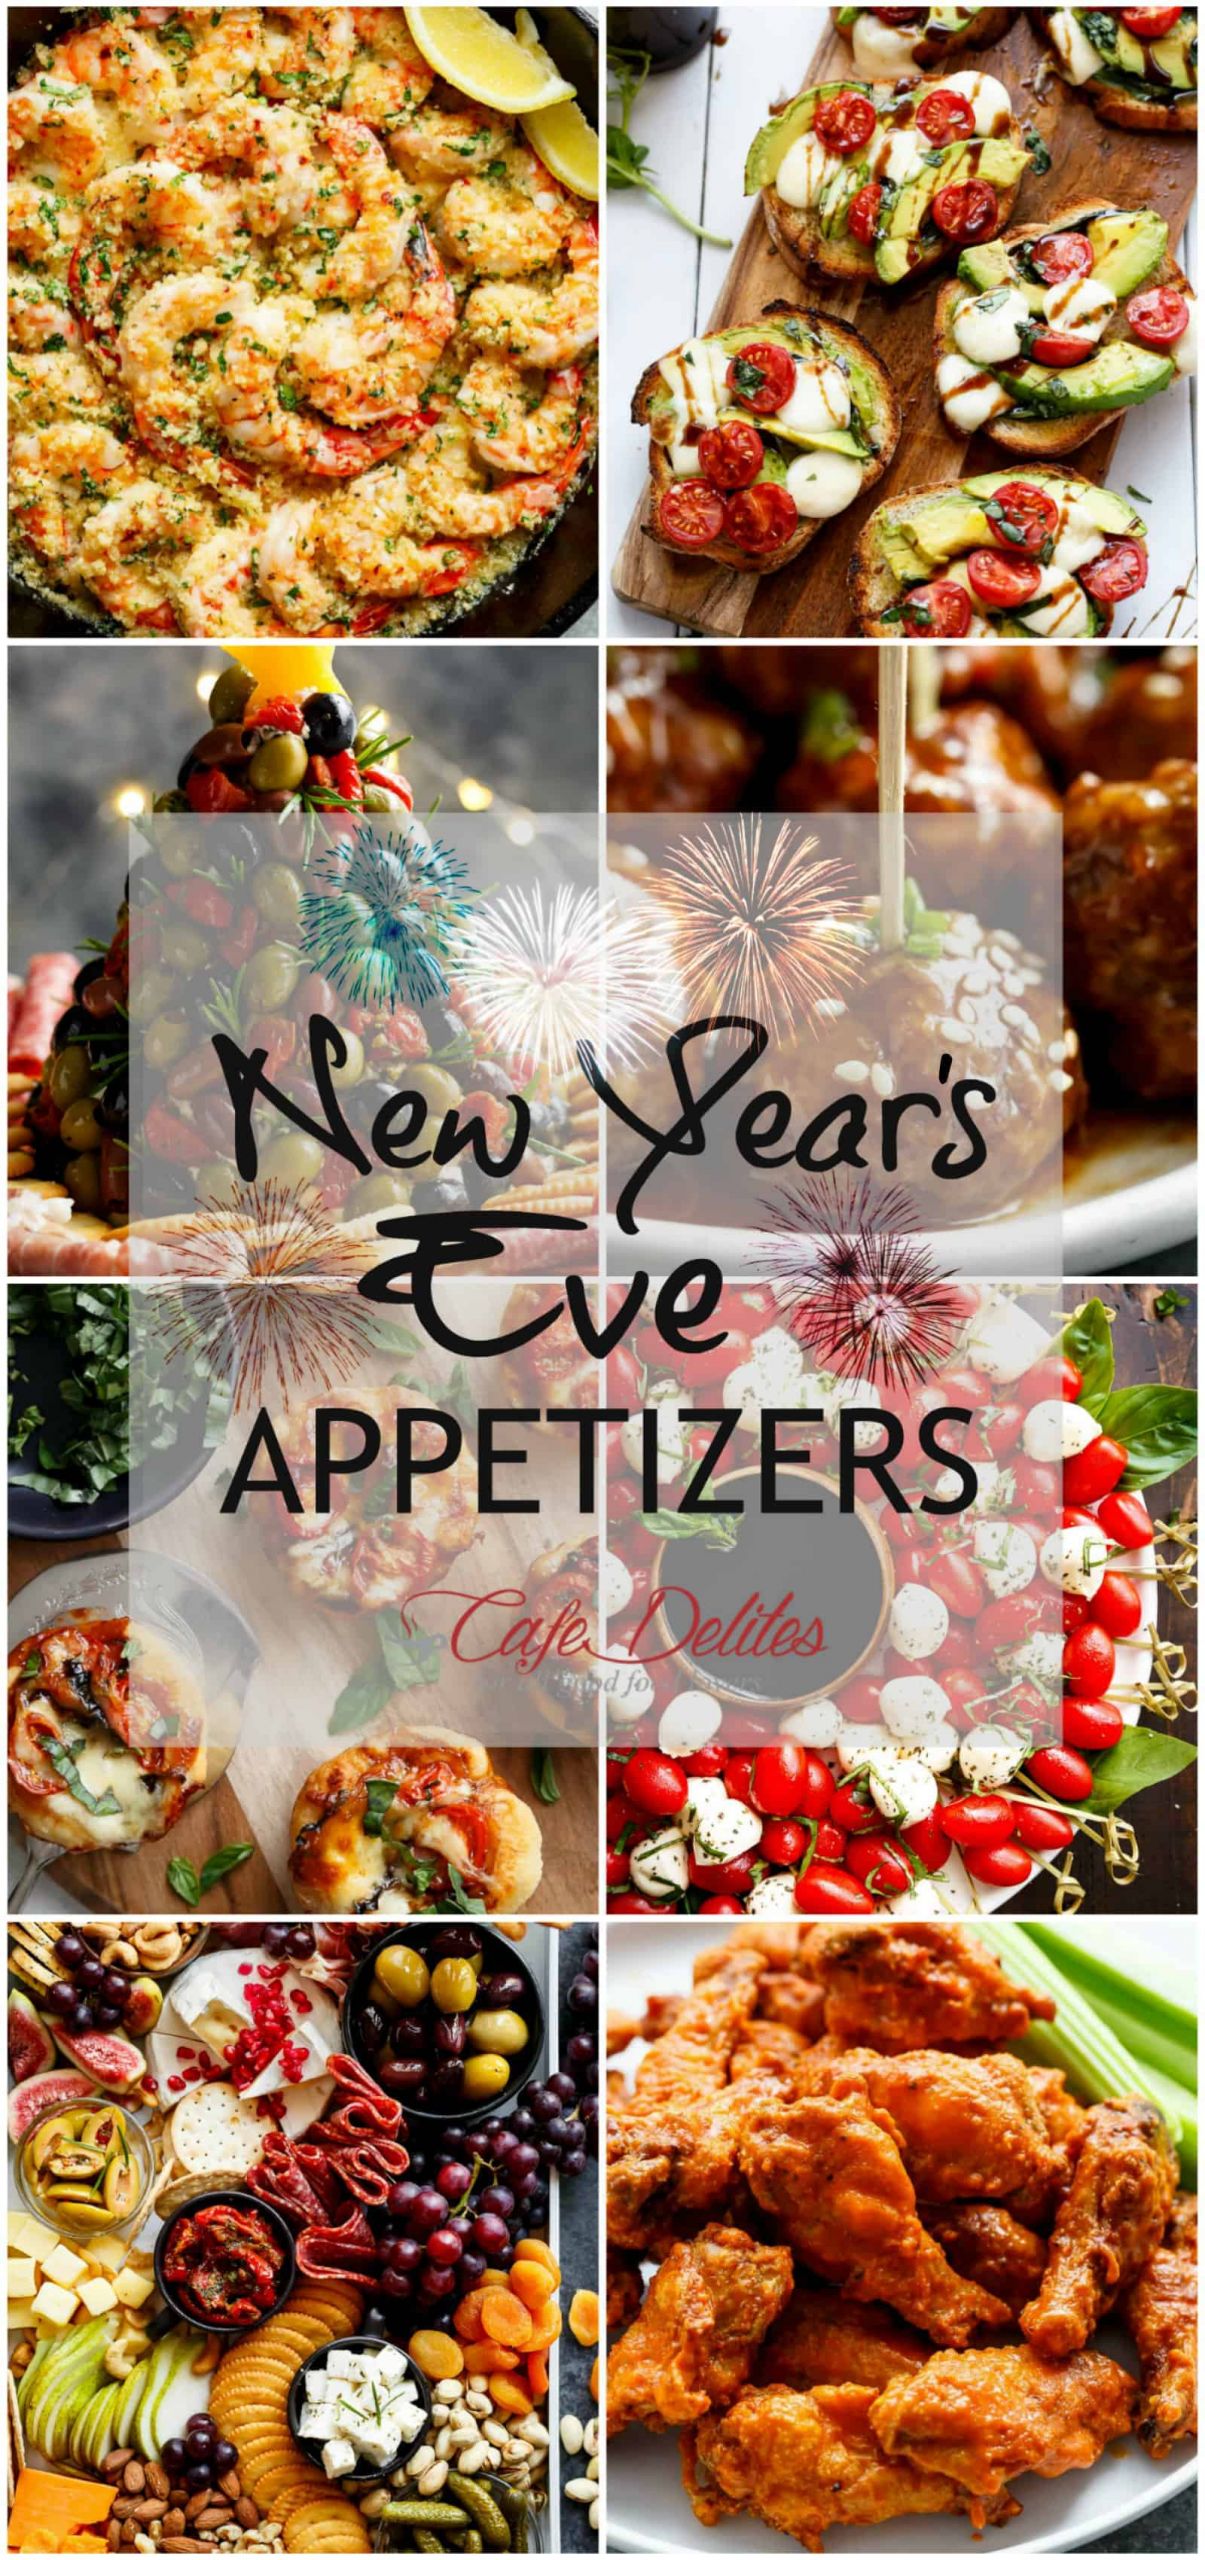 New Years Appetizers
 The Best New Year s Eve Appetizers Cafe Delites